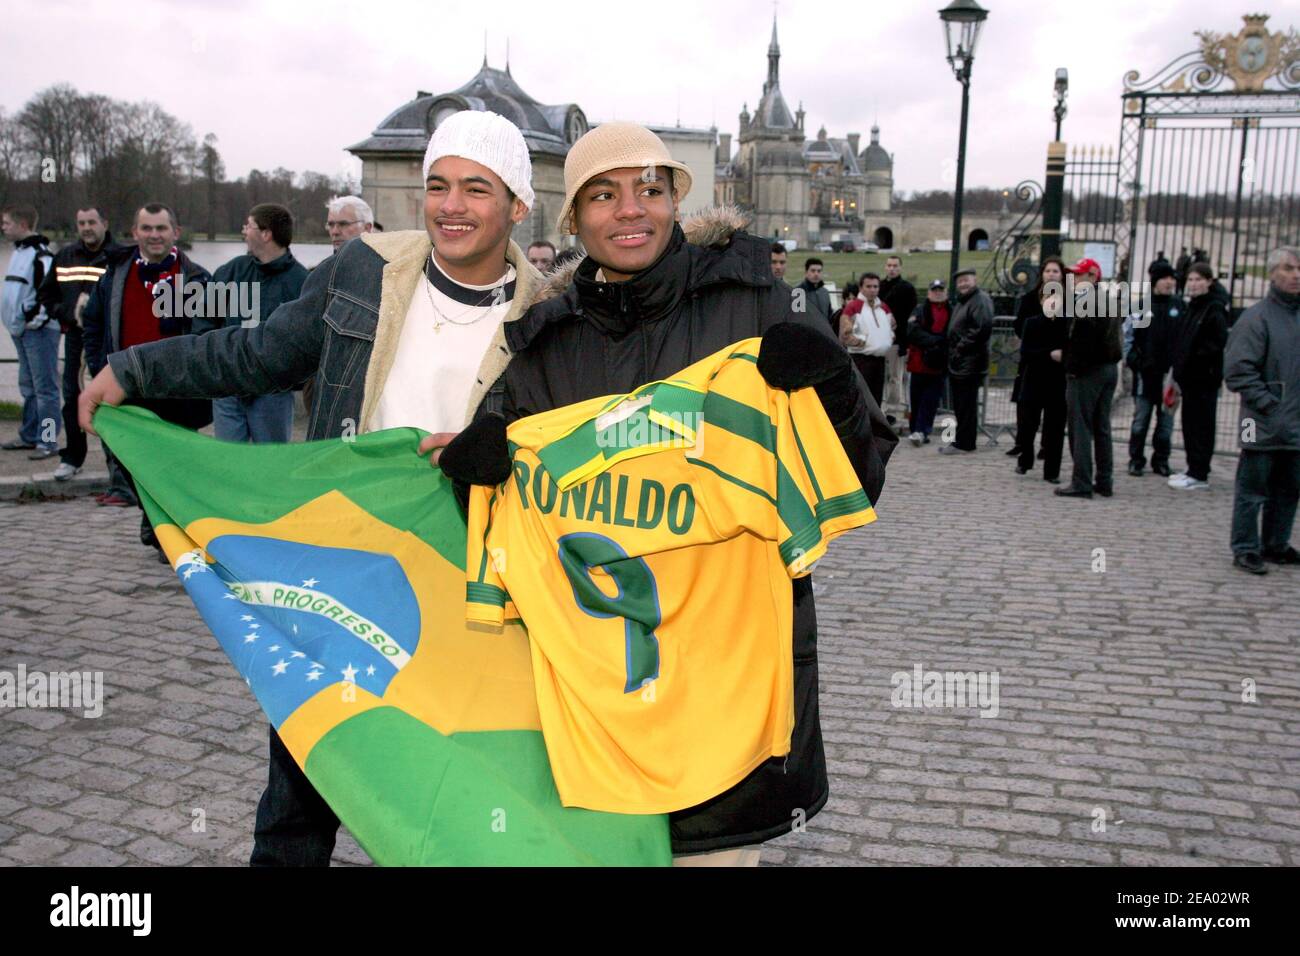 Ronaldo fans outside the Chateau de Chantilly, where Brazilian soccer star Ronaldo and his fiancee, Brazilian top model Daniela Cicarelli, will have dinner with 300 guests to celebrate their engagement, in Chantilly, 50km north of Paris, France, on February 13, 2005. Photo by Gorassini-Hounsfield-Klein-Mousse-Zabulon/ABACA. Stock Photo